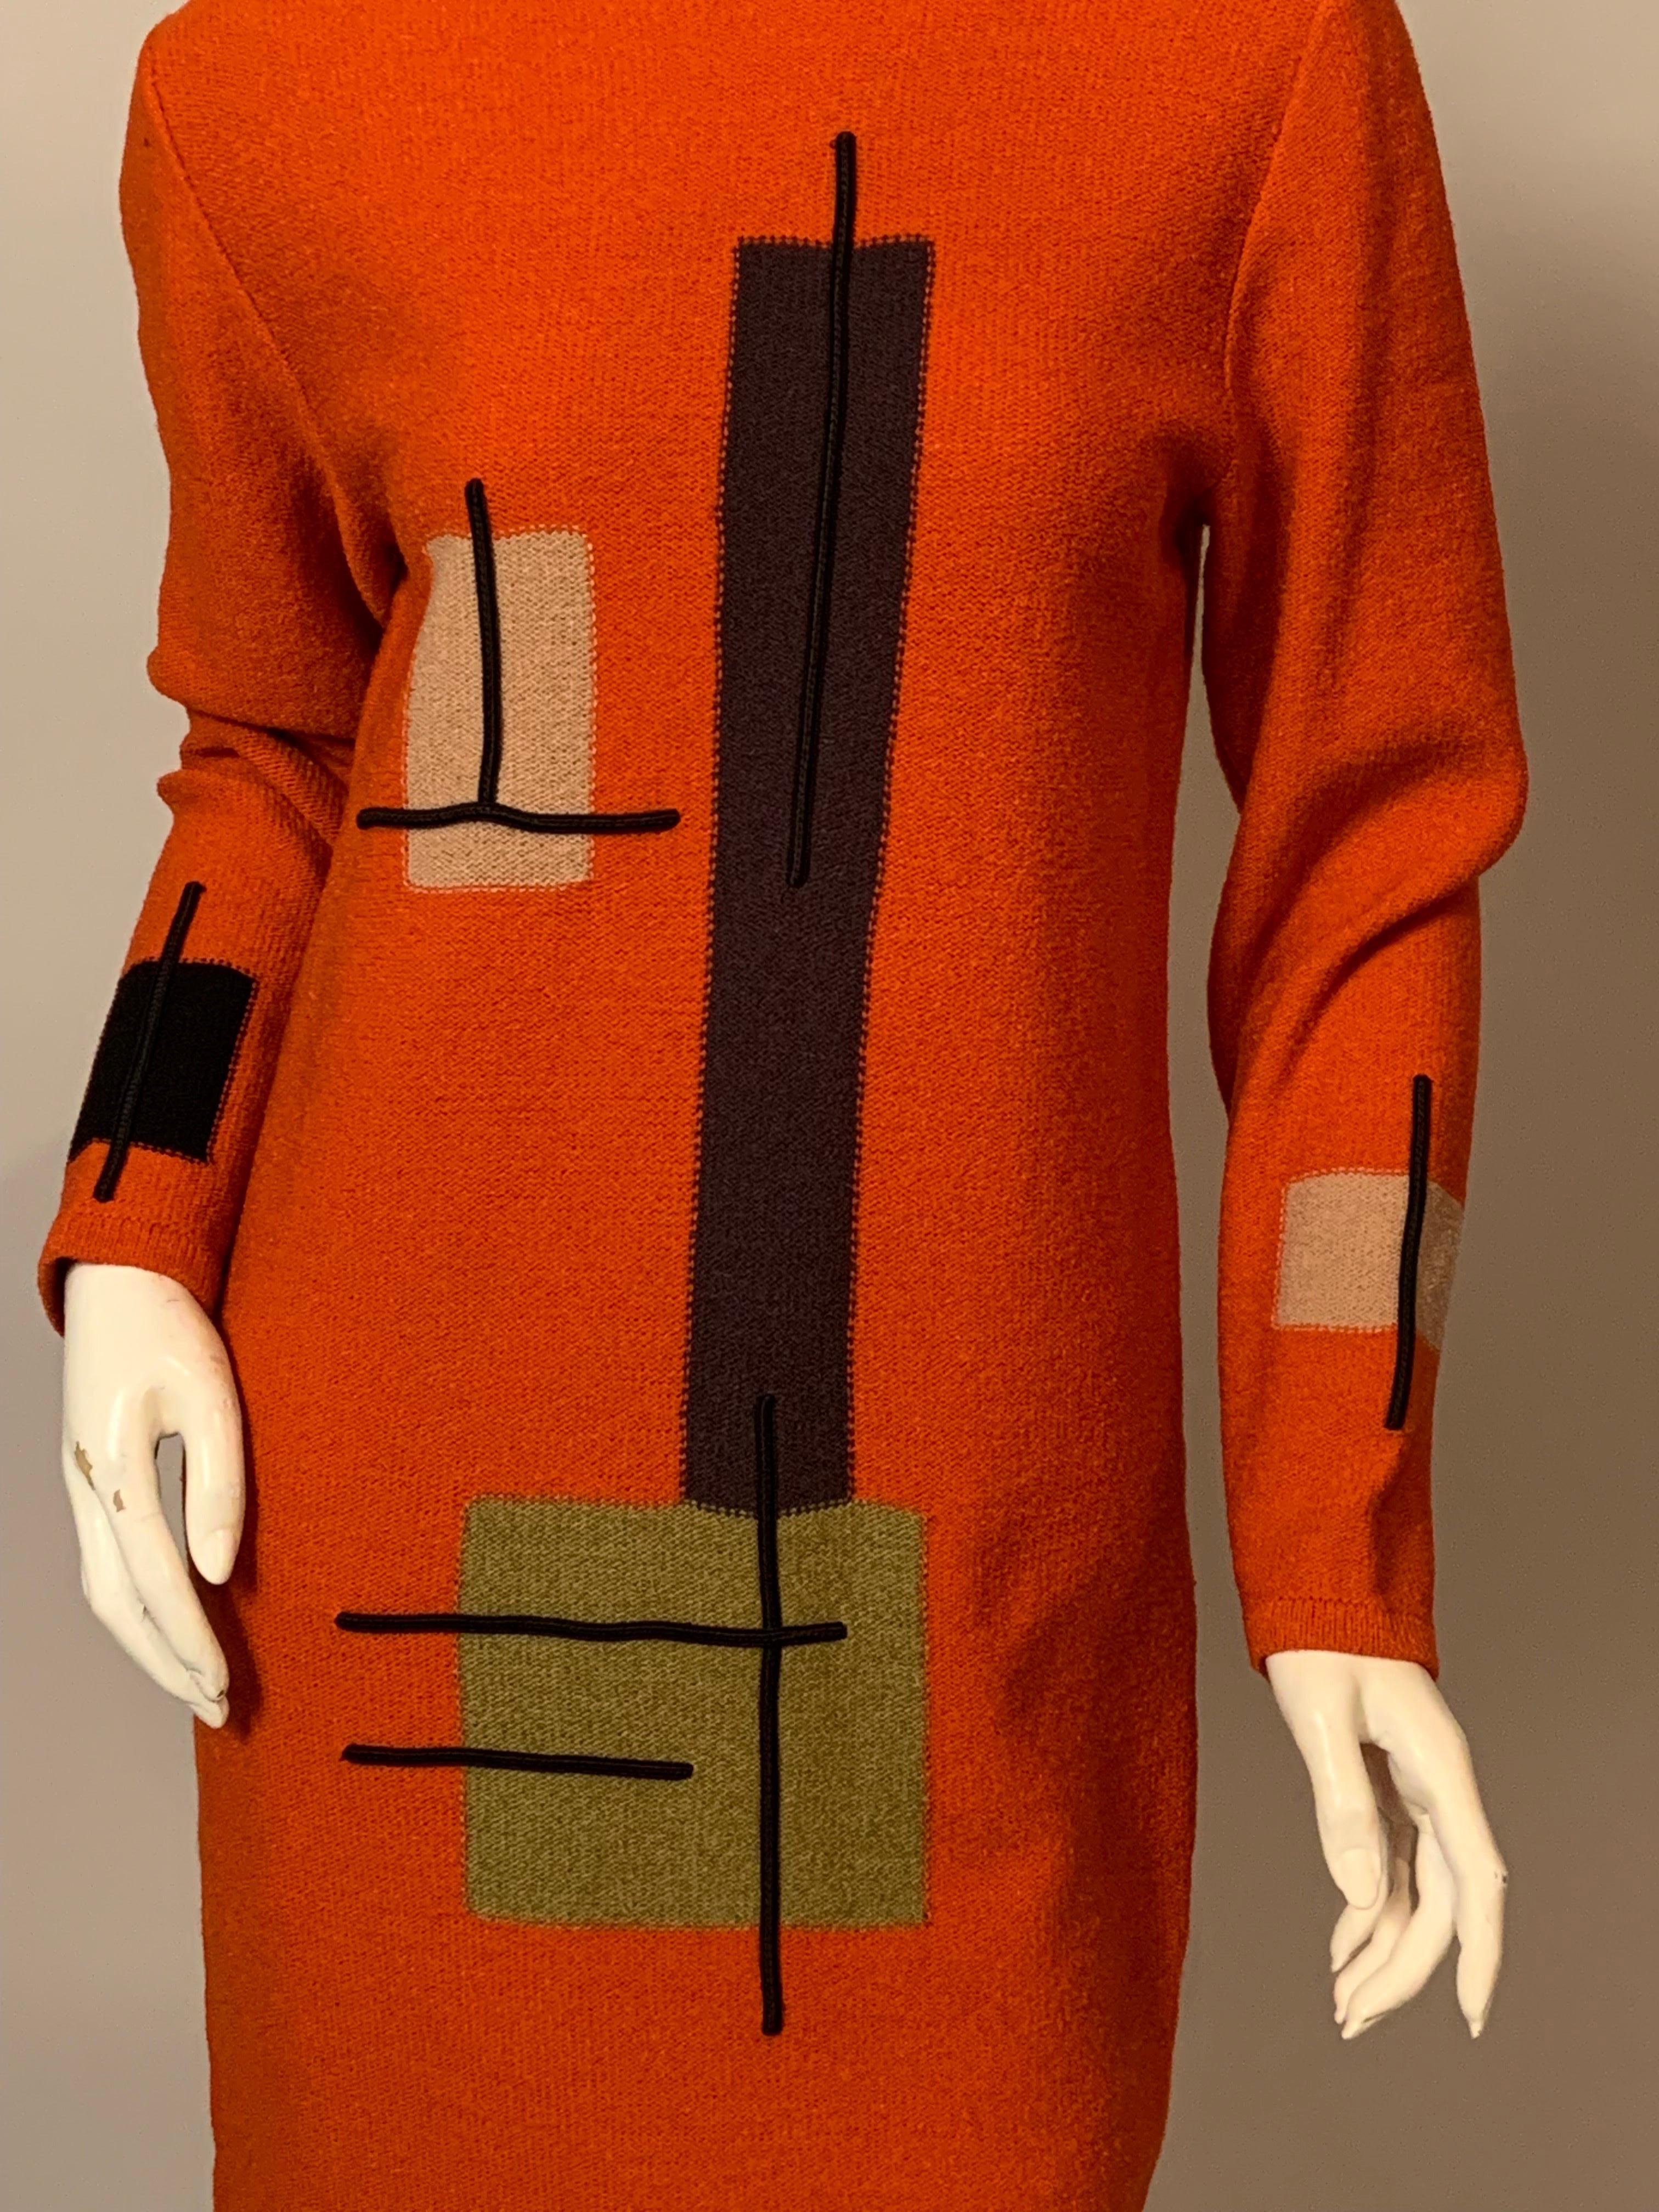 This sleek orange knit dress designed by Steve Fabrikant has a wonderful Modernist inspired design on the front and the sleeves.  The geometric design is done in camel, olive and charcoal grey yarn with bars of black braid adding dimension and